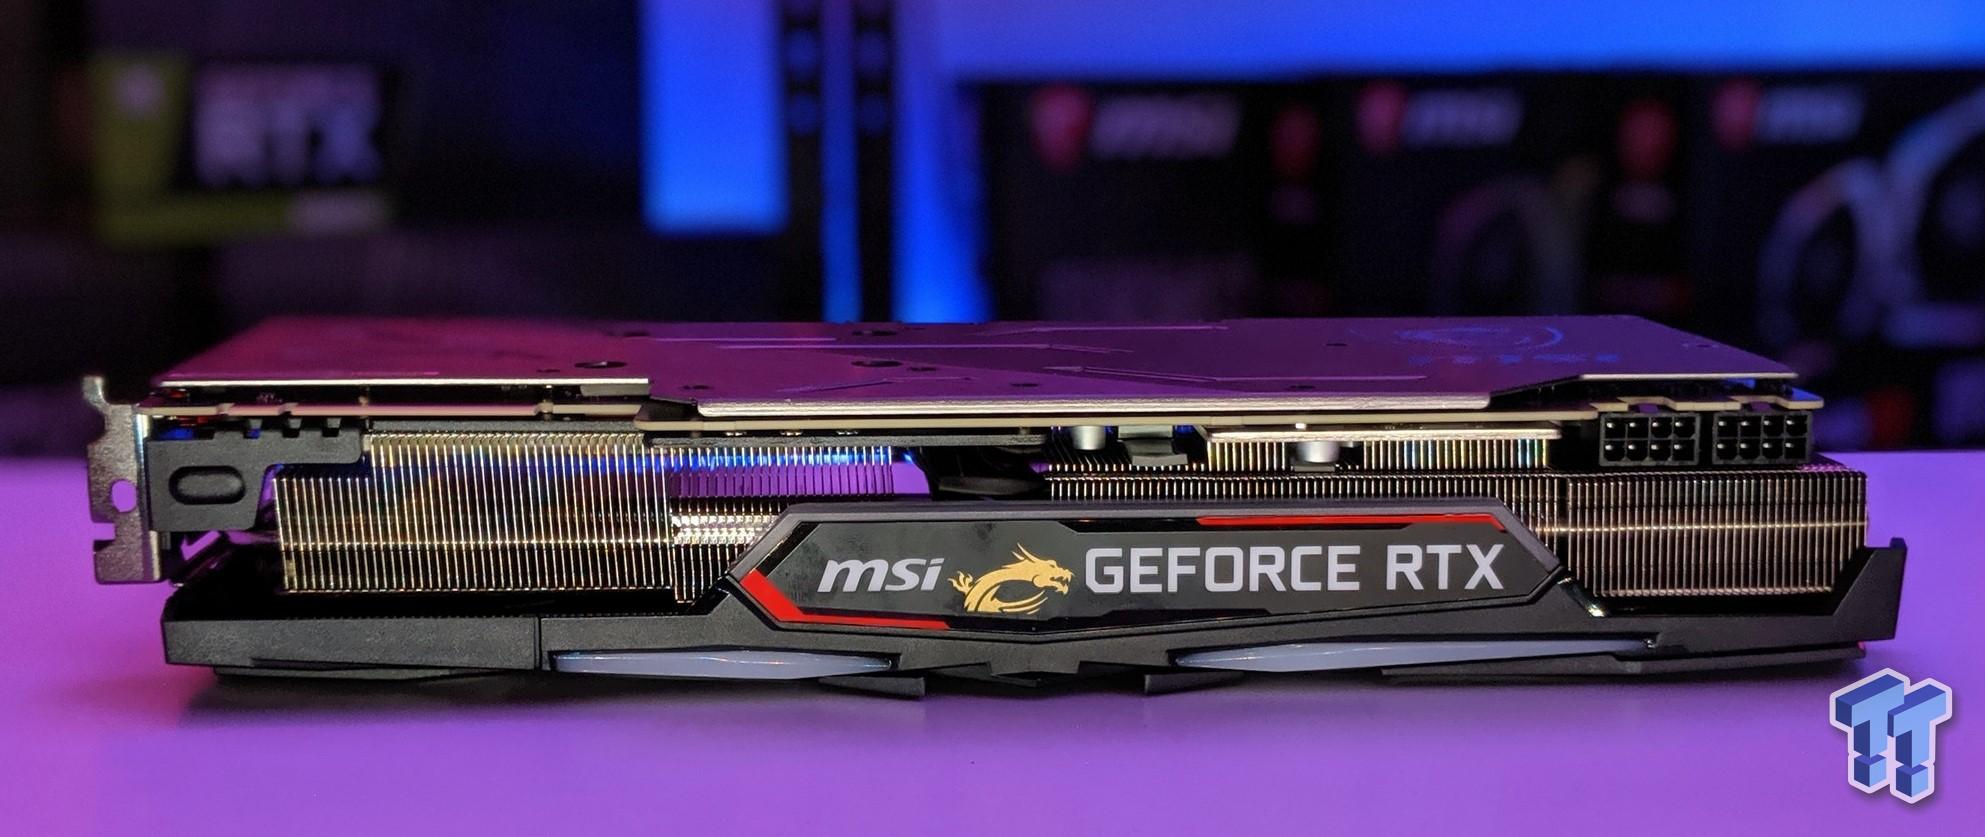 MSI RTX 2070 GAMING X Review